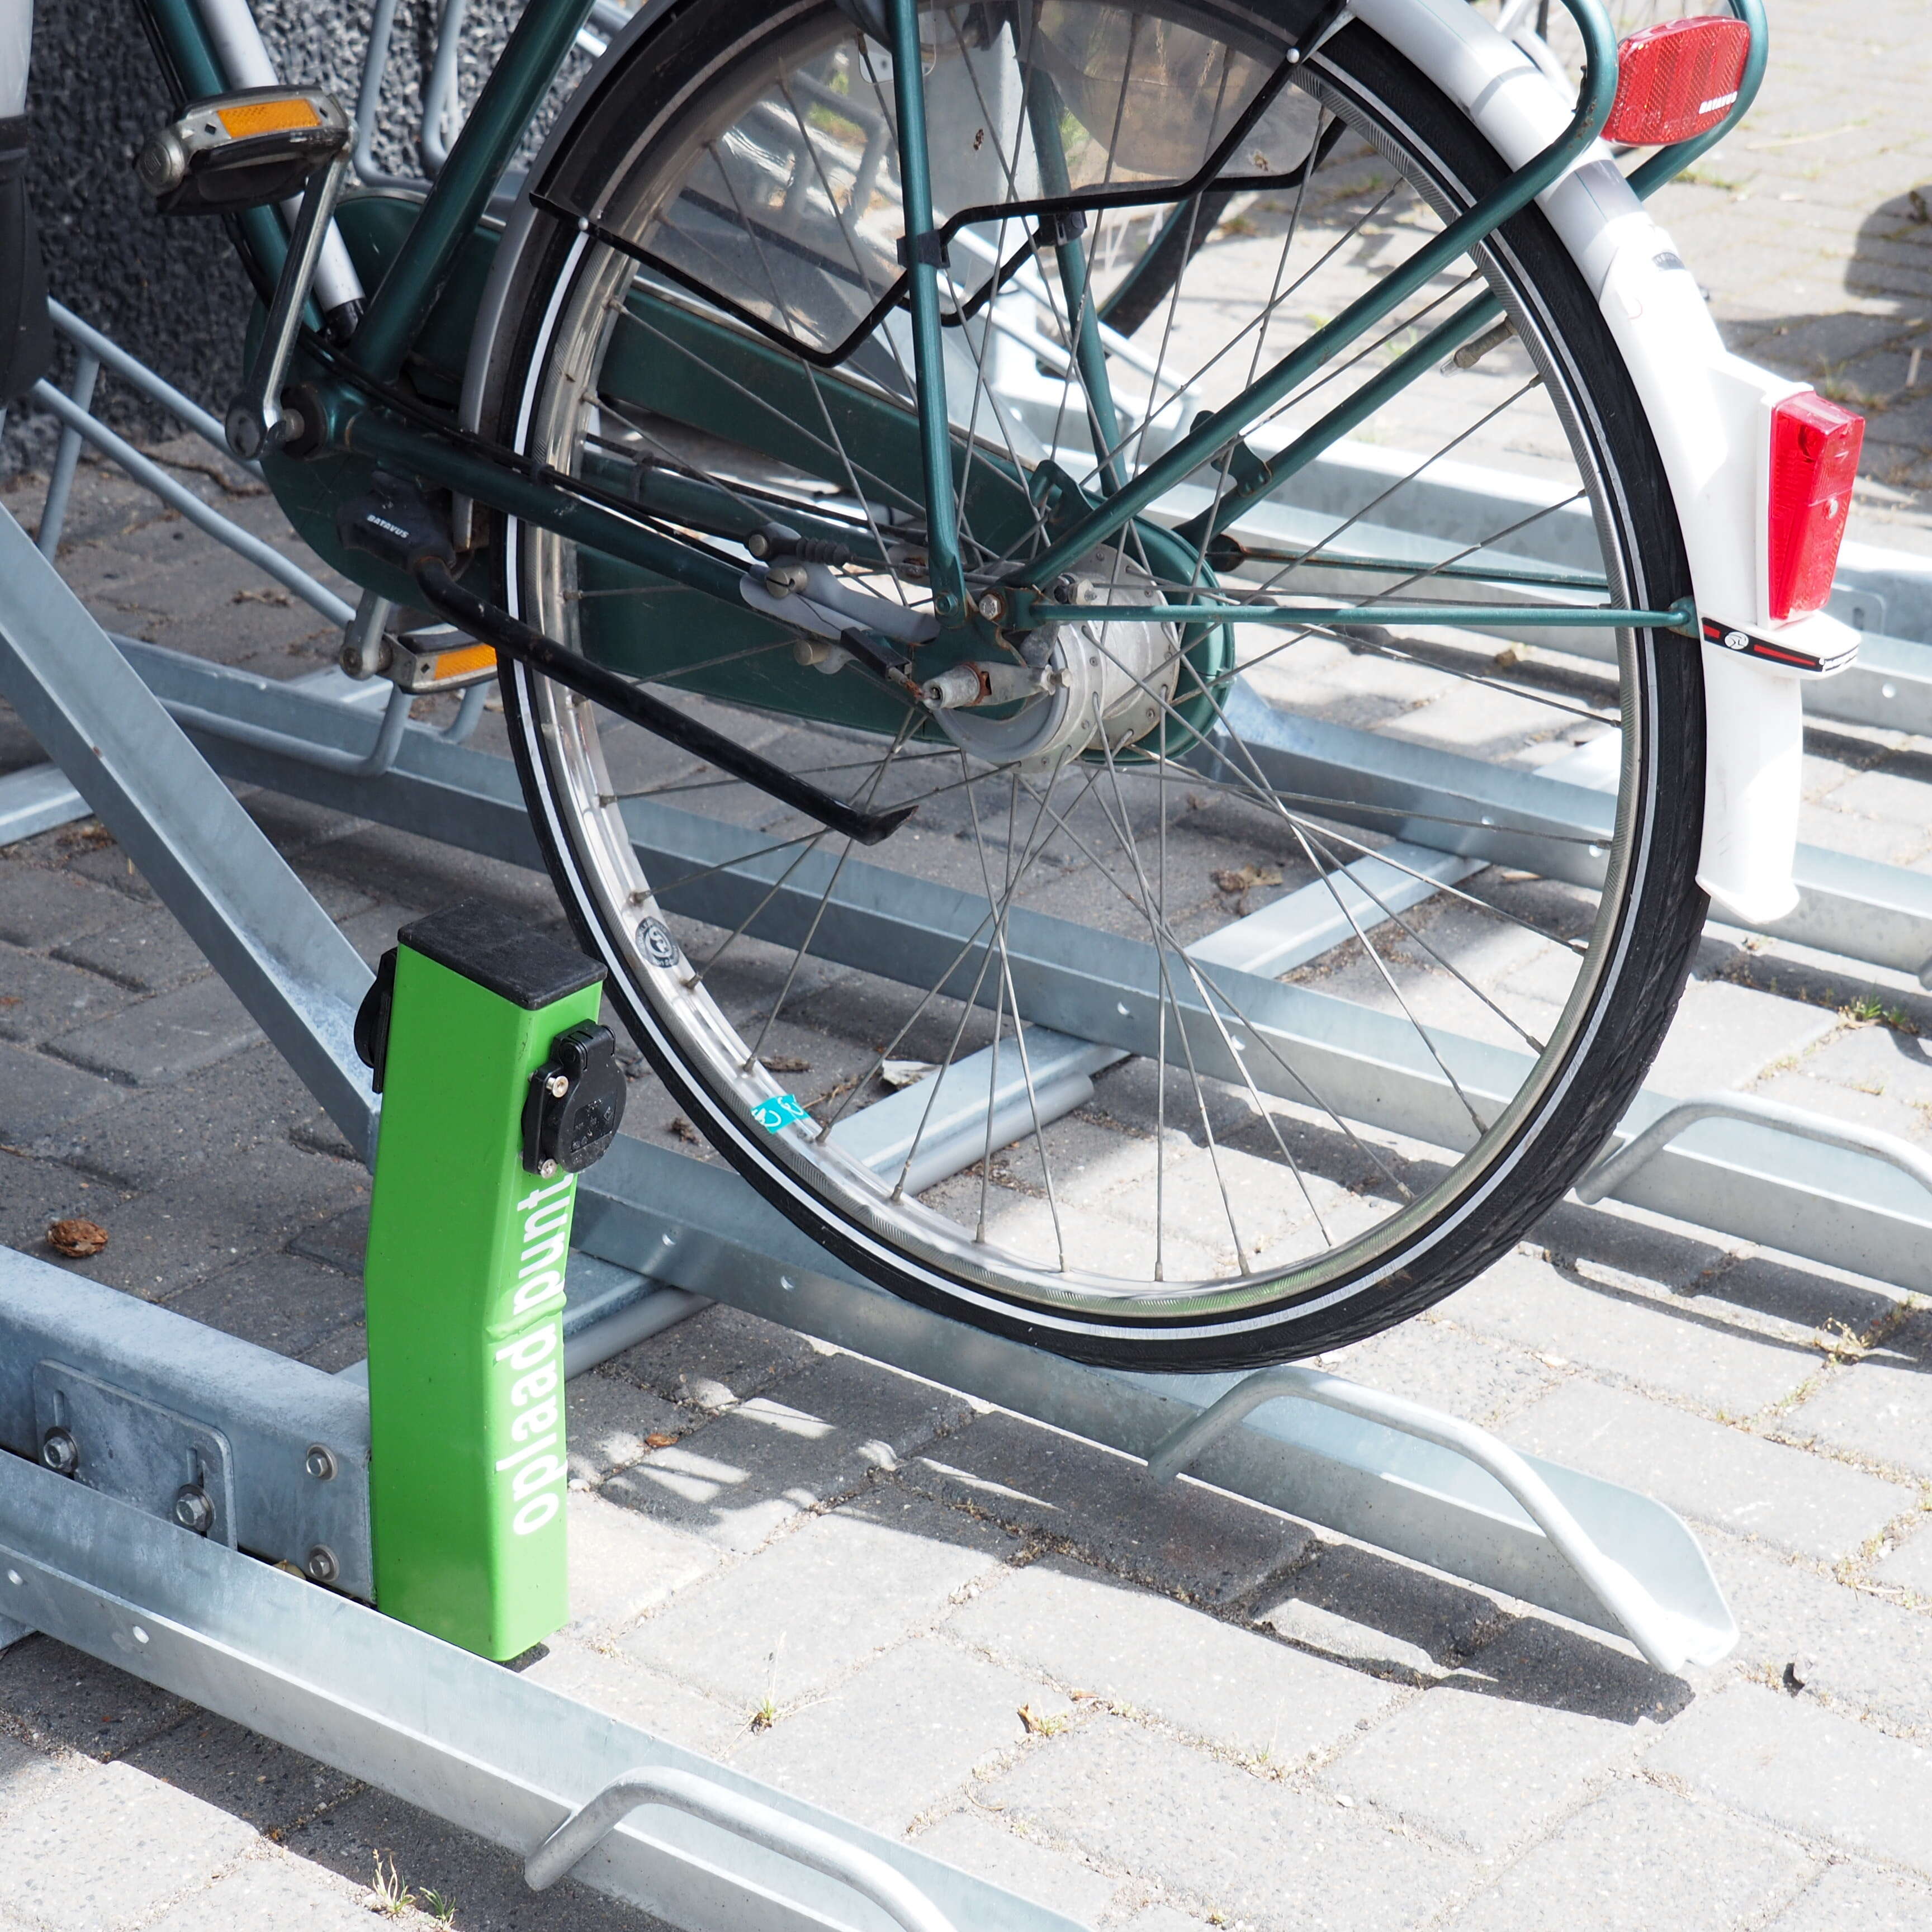 UK’s first supercharged Two-Tier Cycle Racks now available for eBike charging!